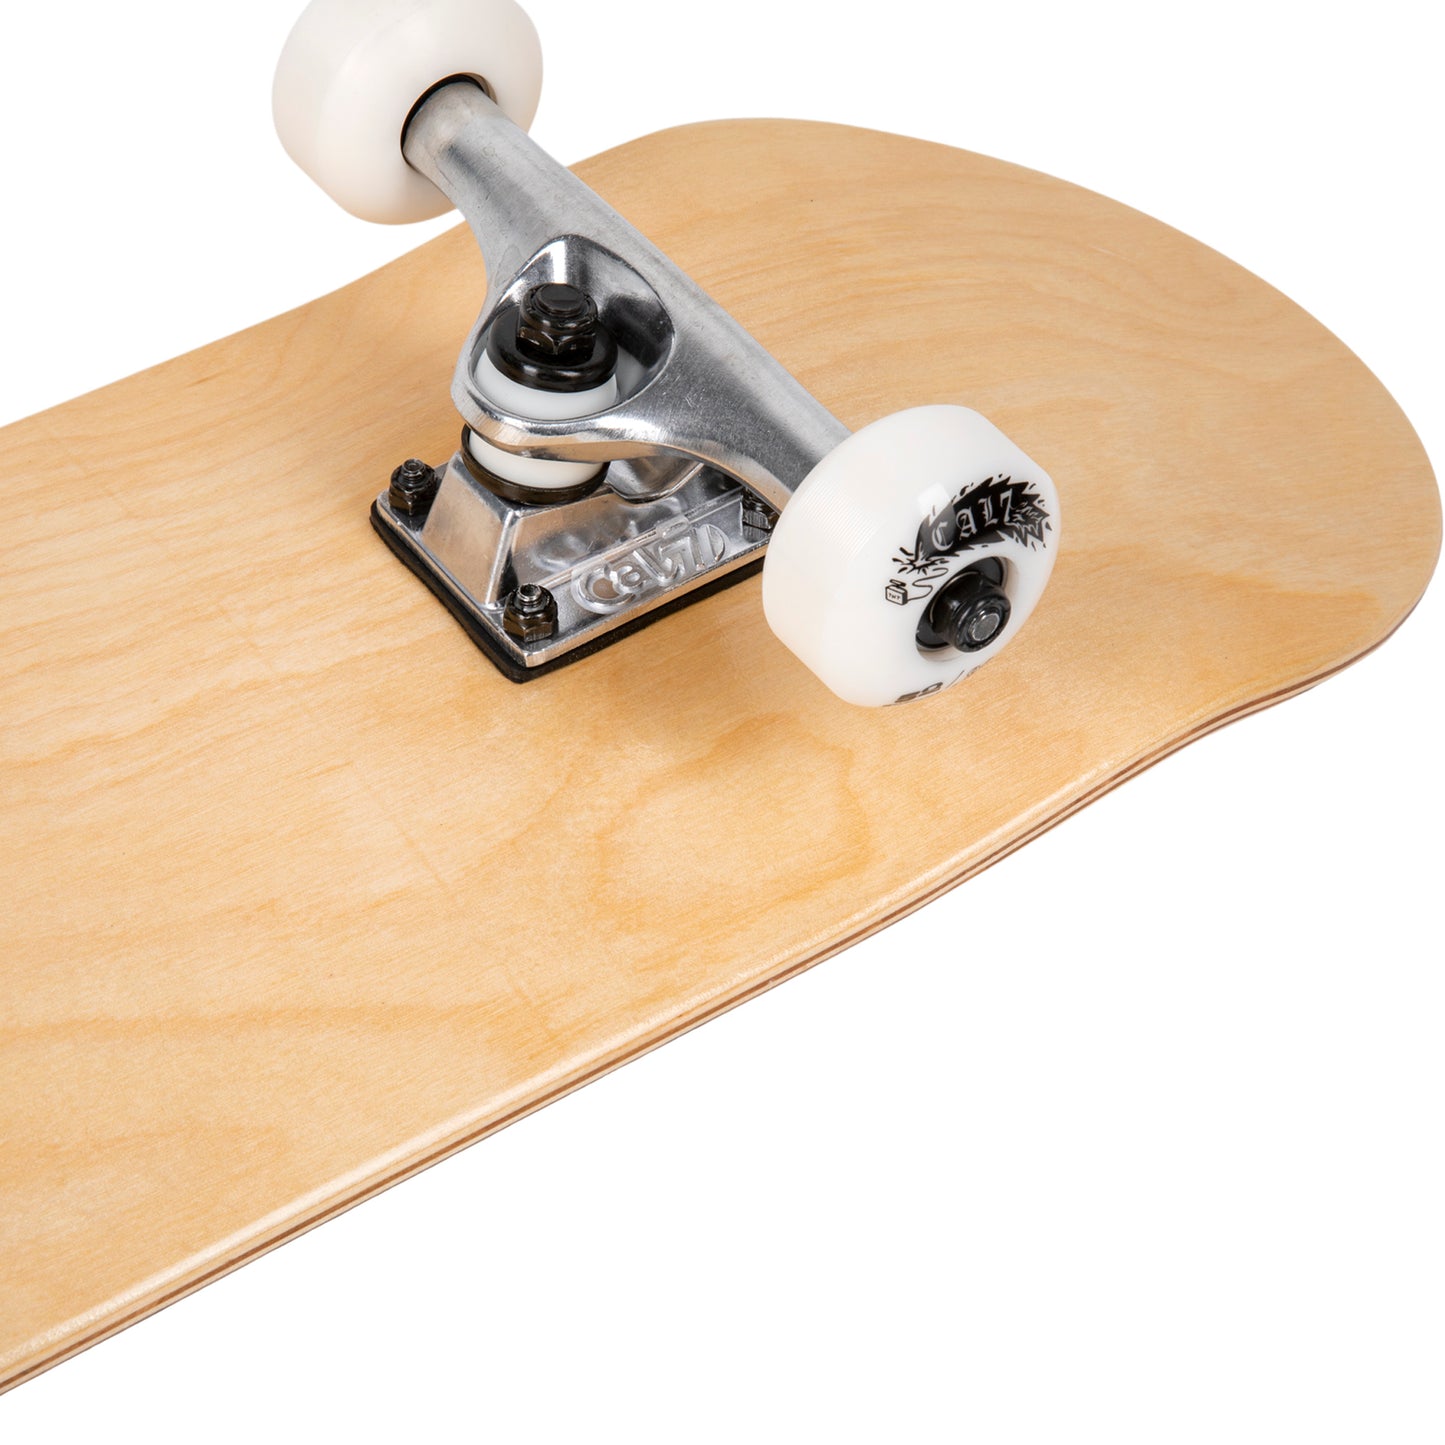 Cal 7 Complete 7.5/7.75/8-Inch Skateboard Grain with Logo and Natural Stain